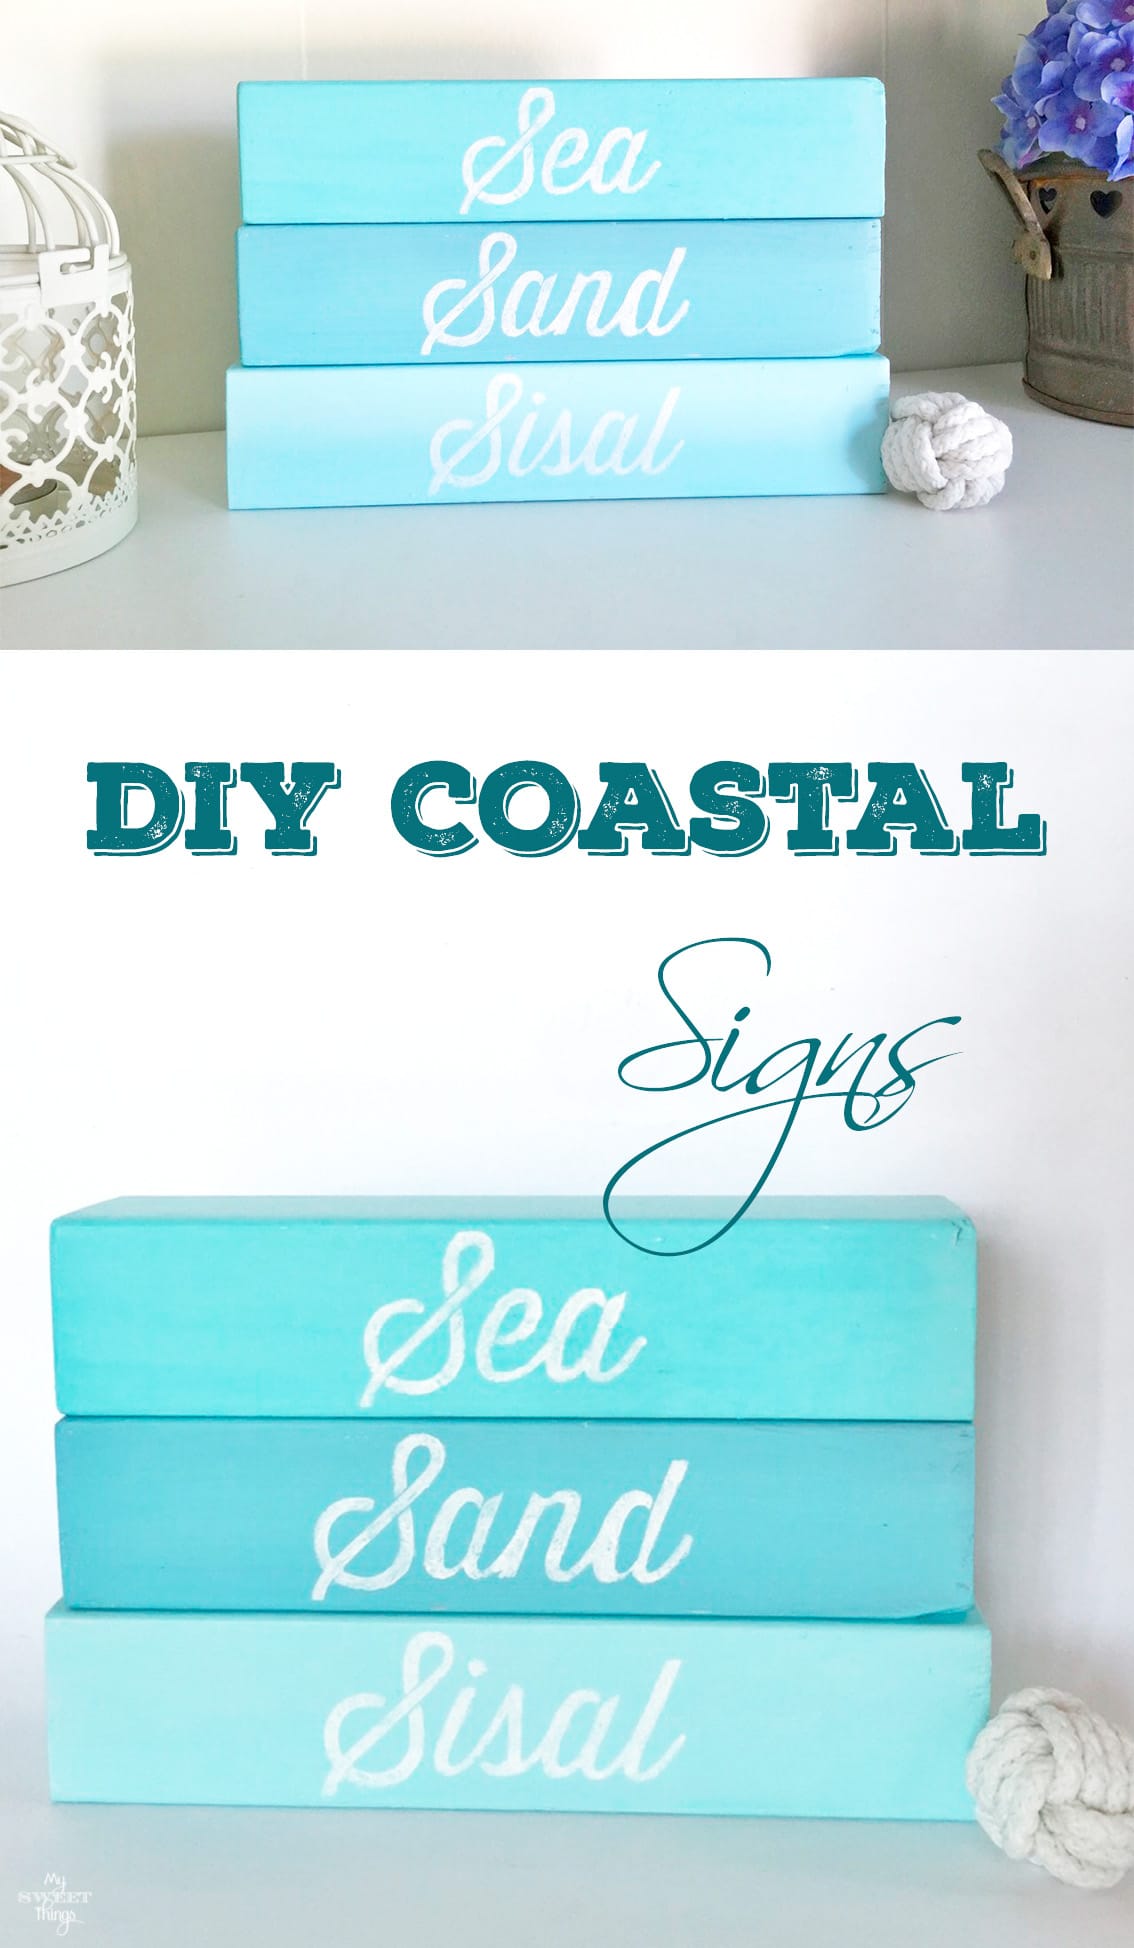 How to make your own DIY coastal signs out of some scrap wood and paint